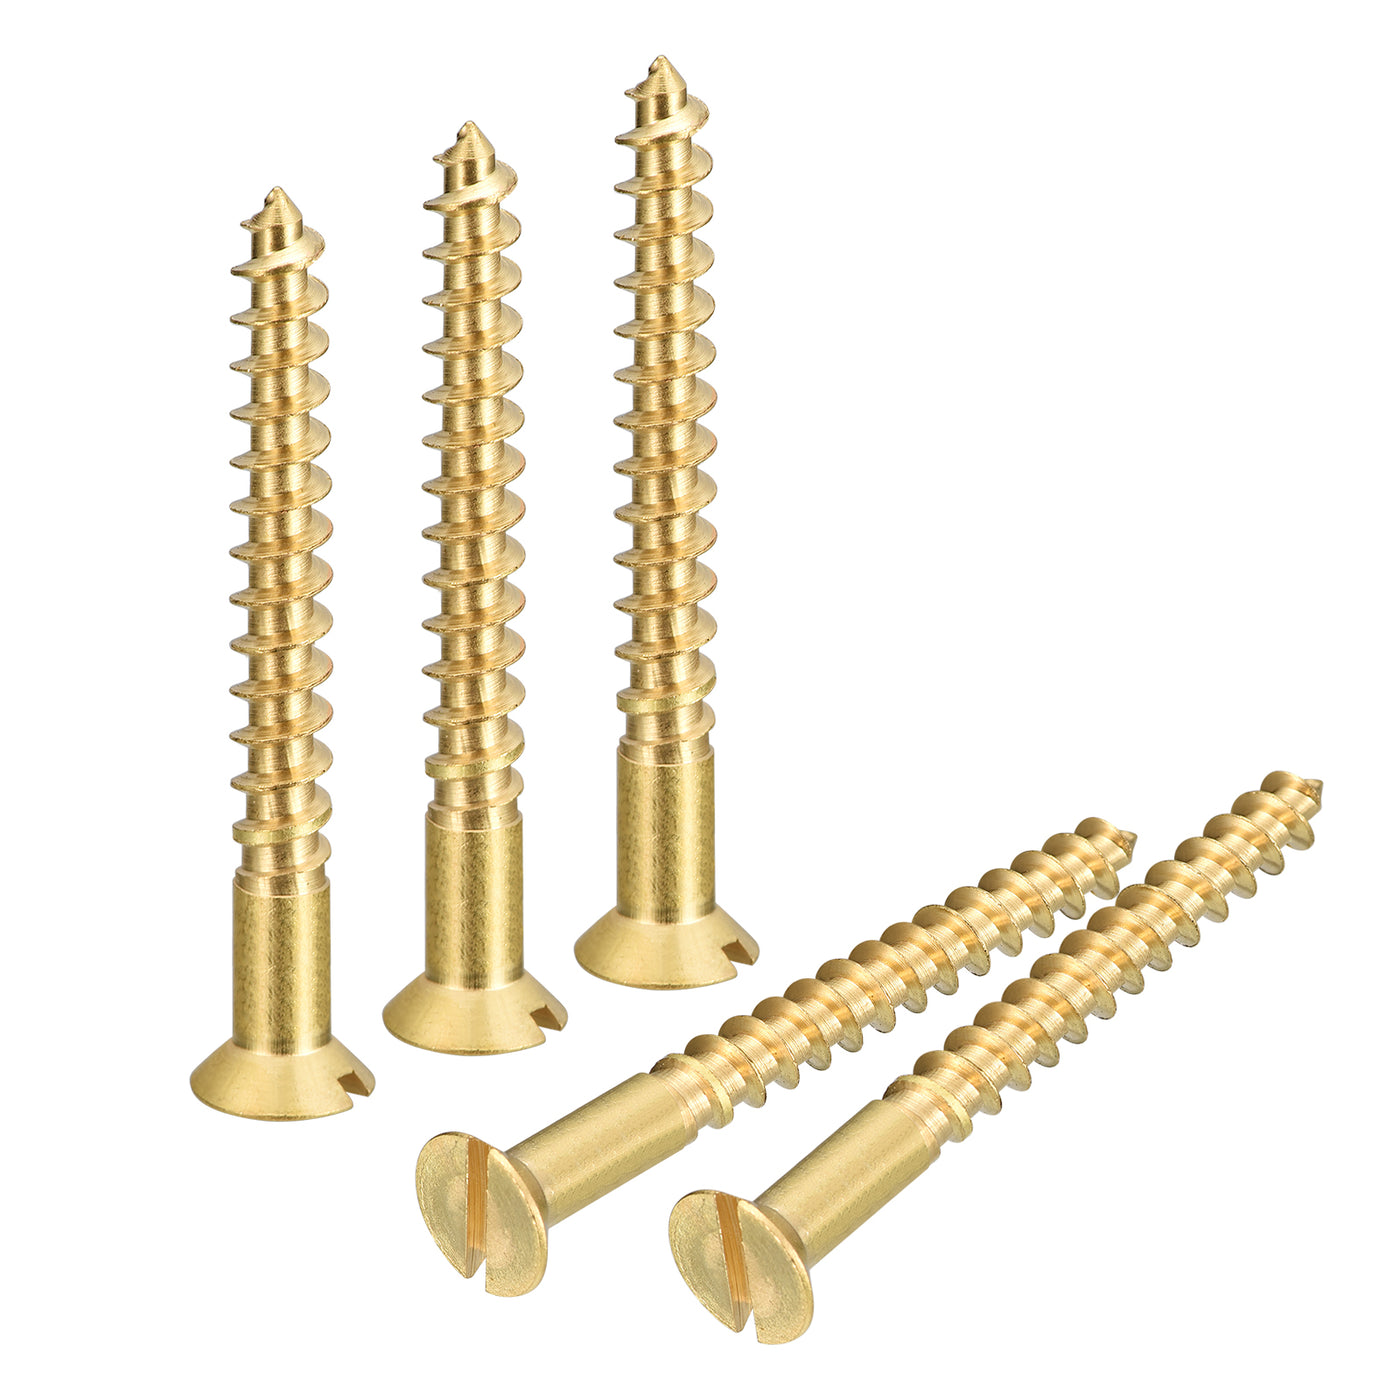 uxcell Uxcell 20Pcs M6 x 60mm Brass Slotted Drive Flat Head Wood Screws Self Tapping Screw